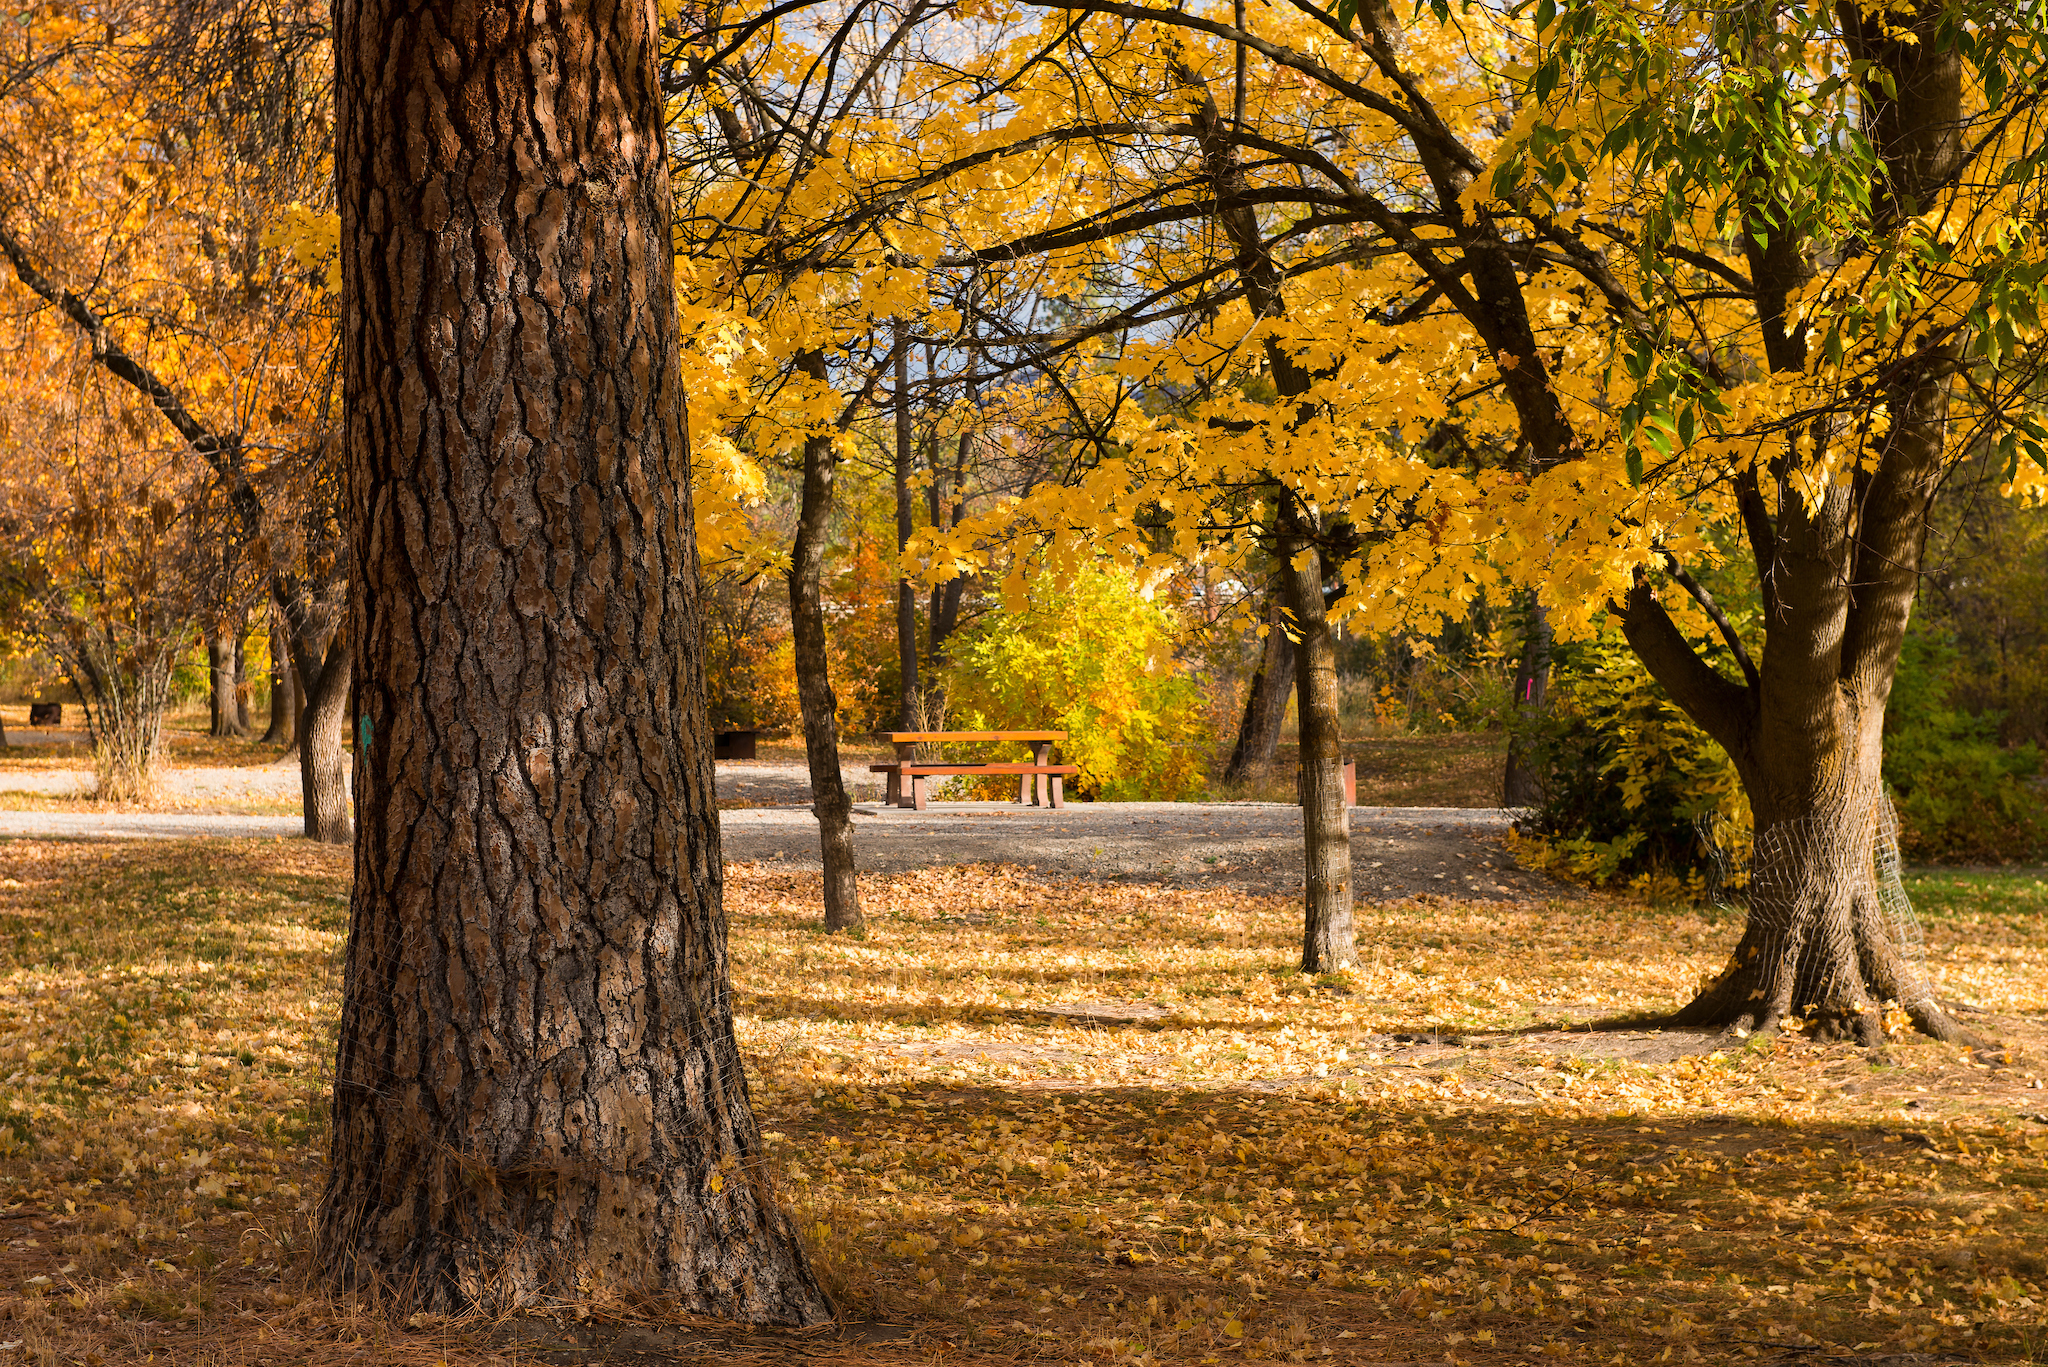 A bench in the distance nested between large trees with fall foliage.